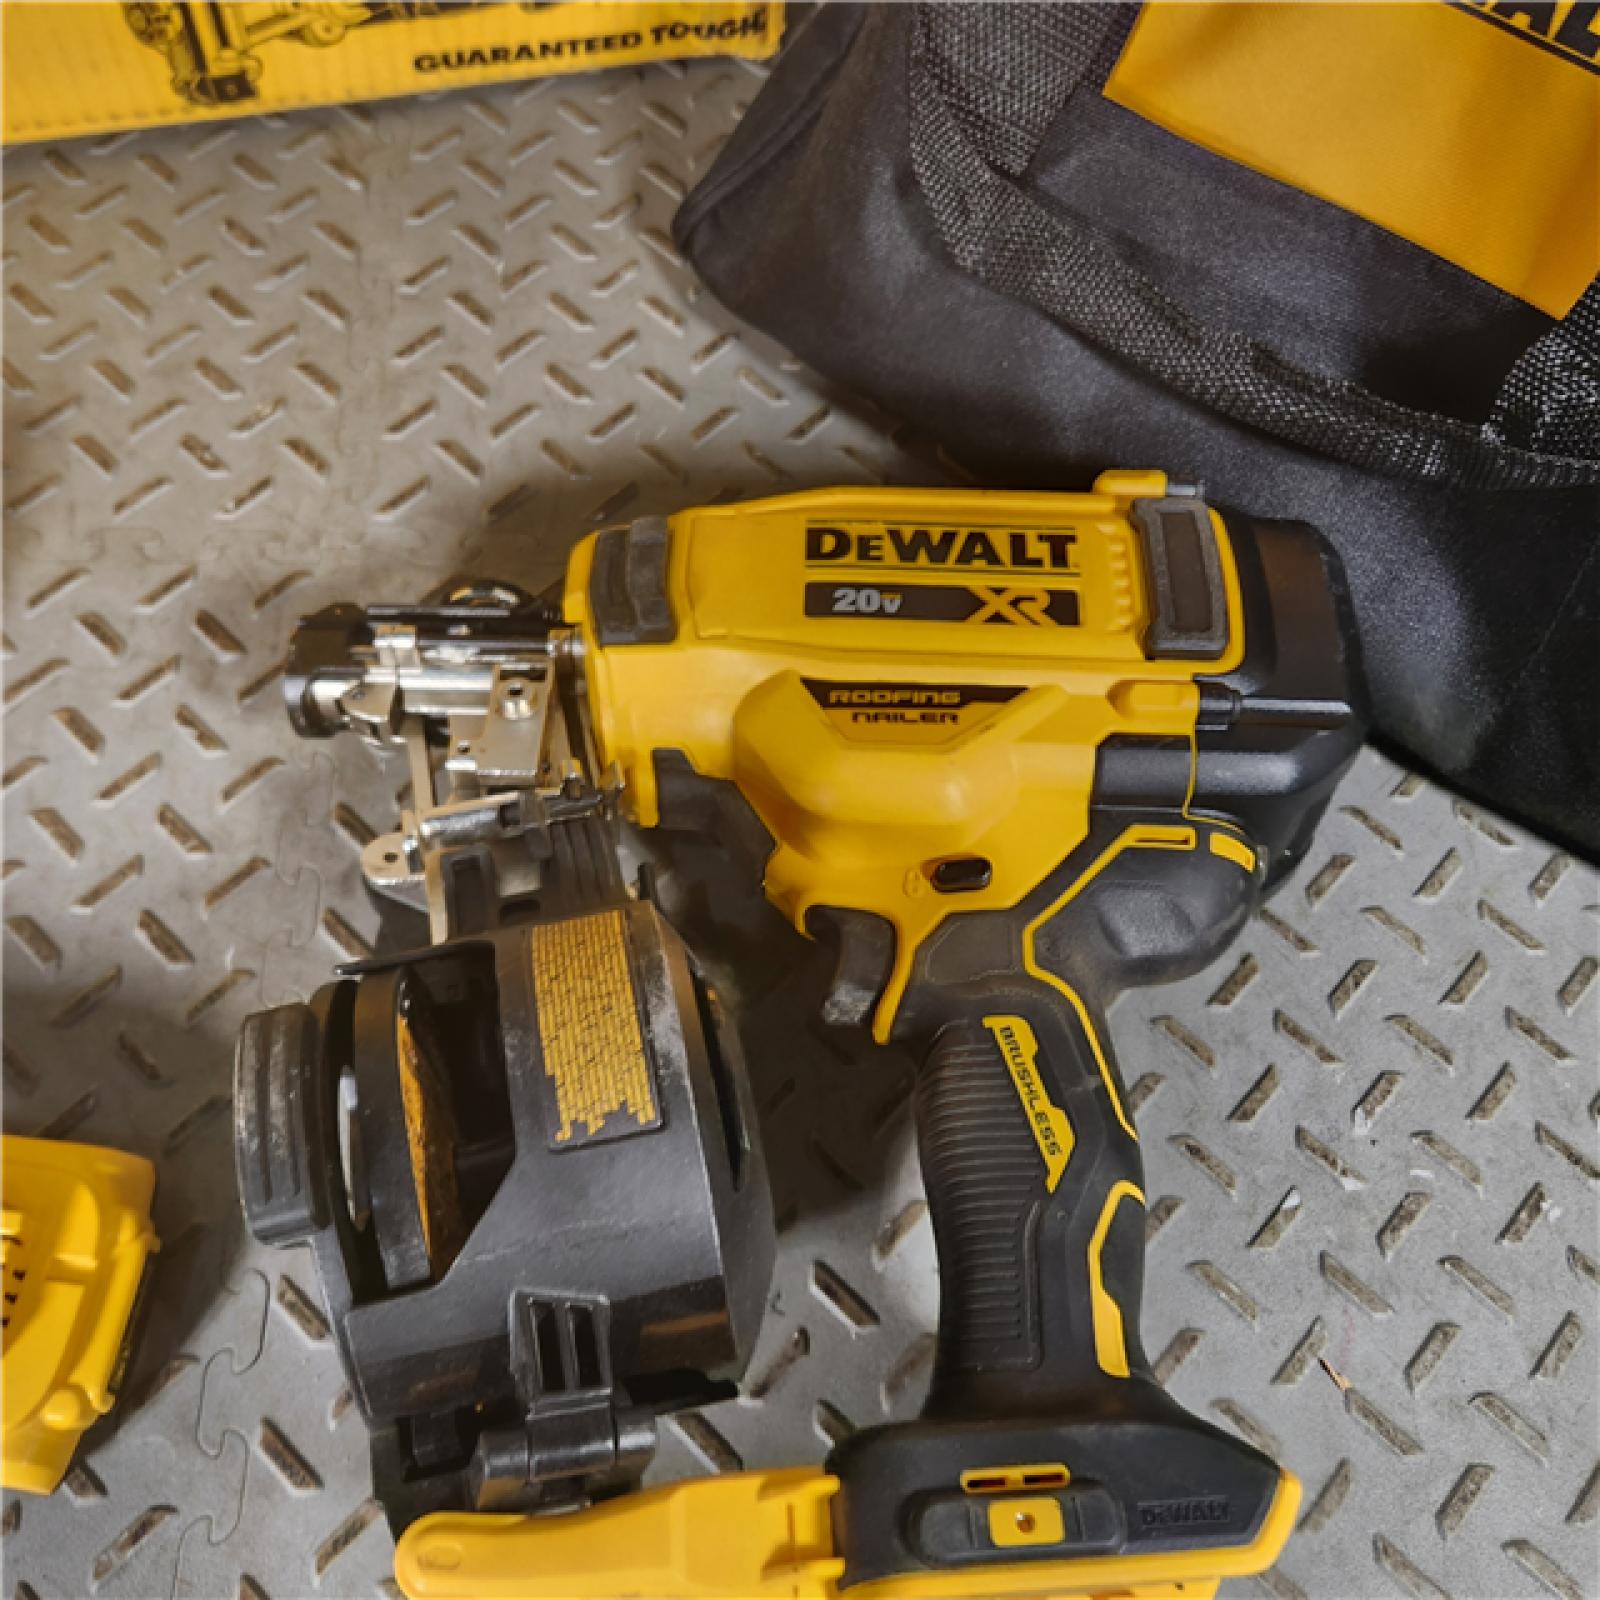 Houston Location - AS-IS Dewalt 20V MAX 15 Cordless Coil Roofing Nailer Kit - Appears IN NEW Condition